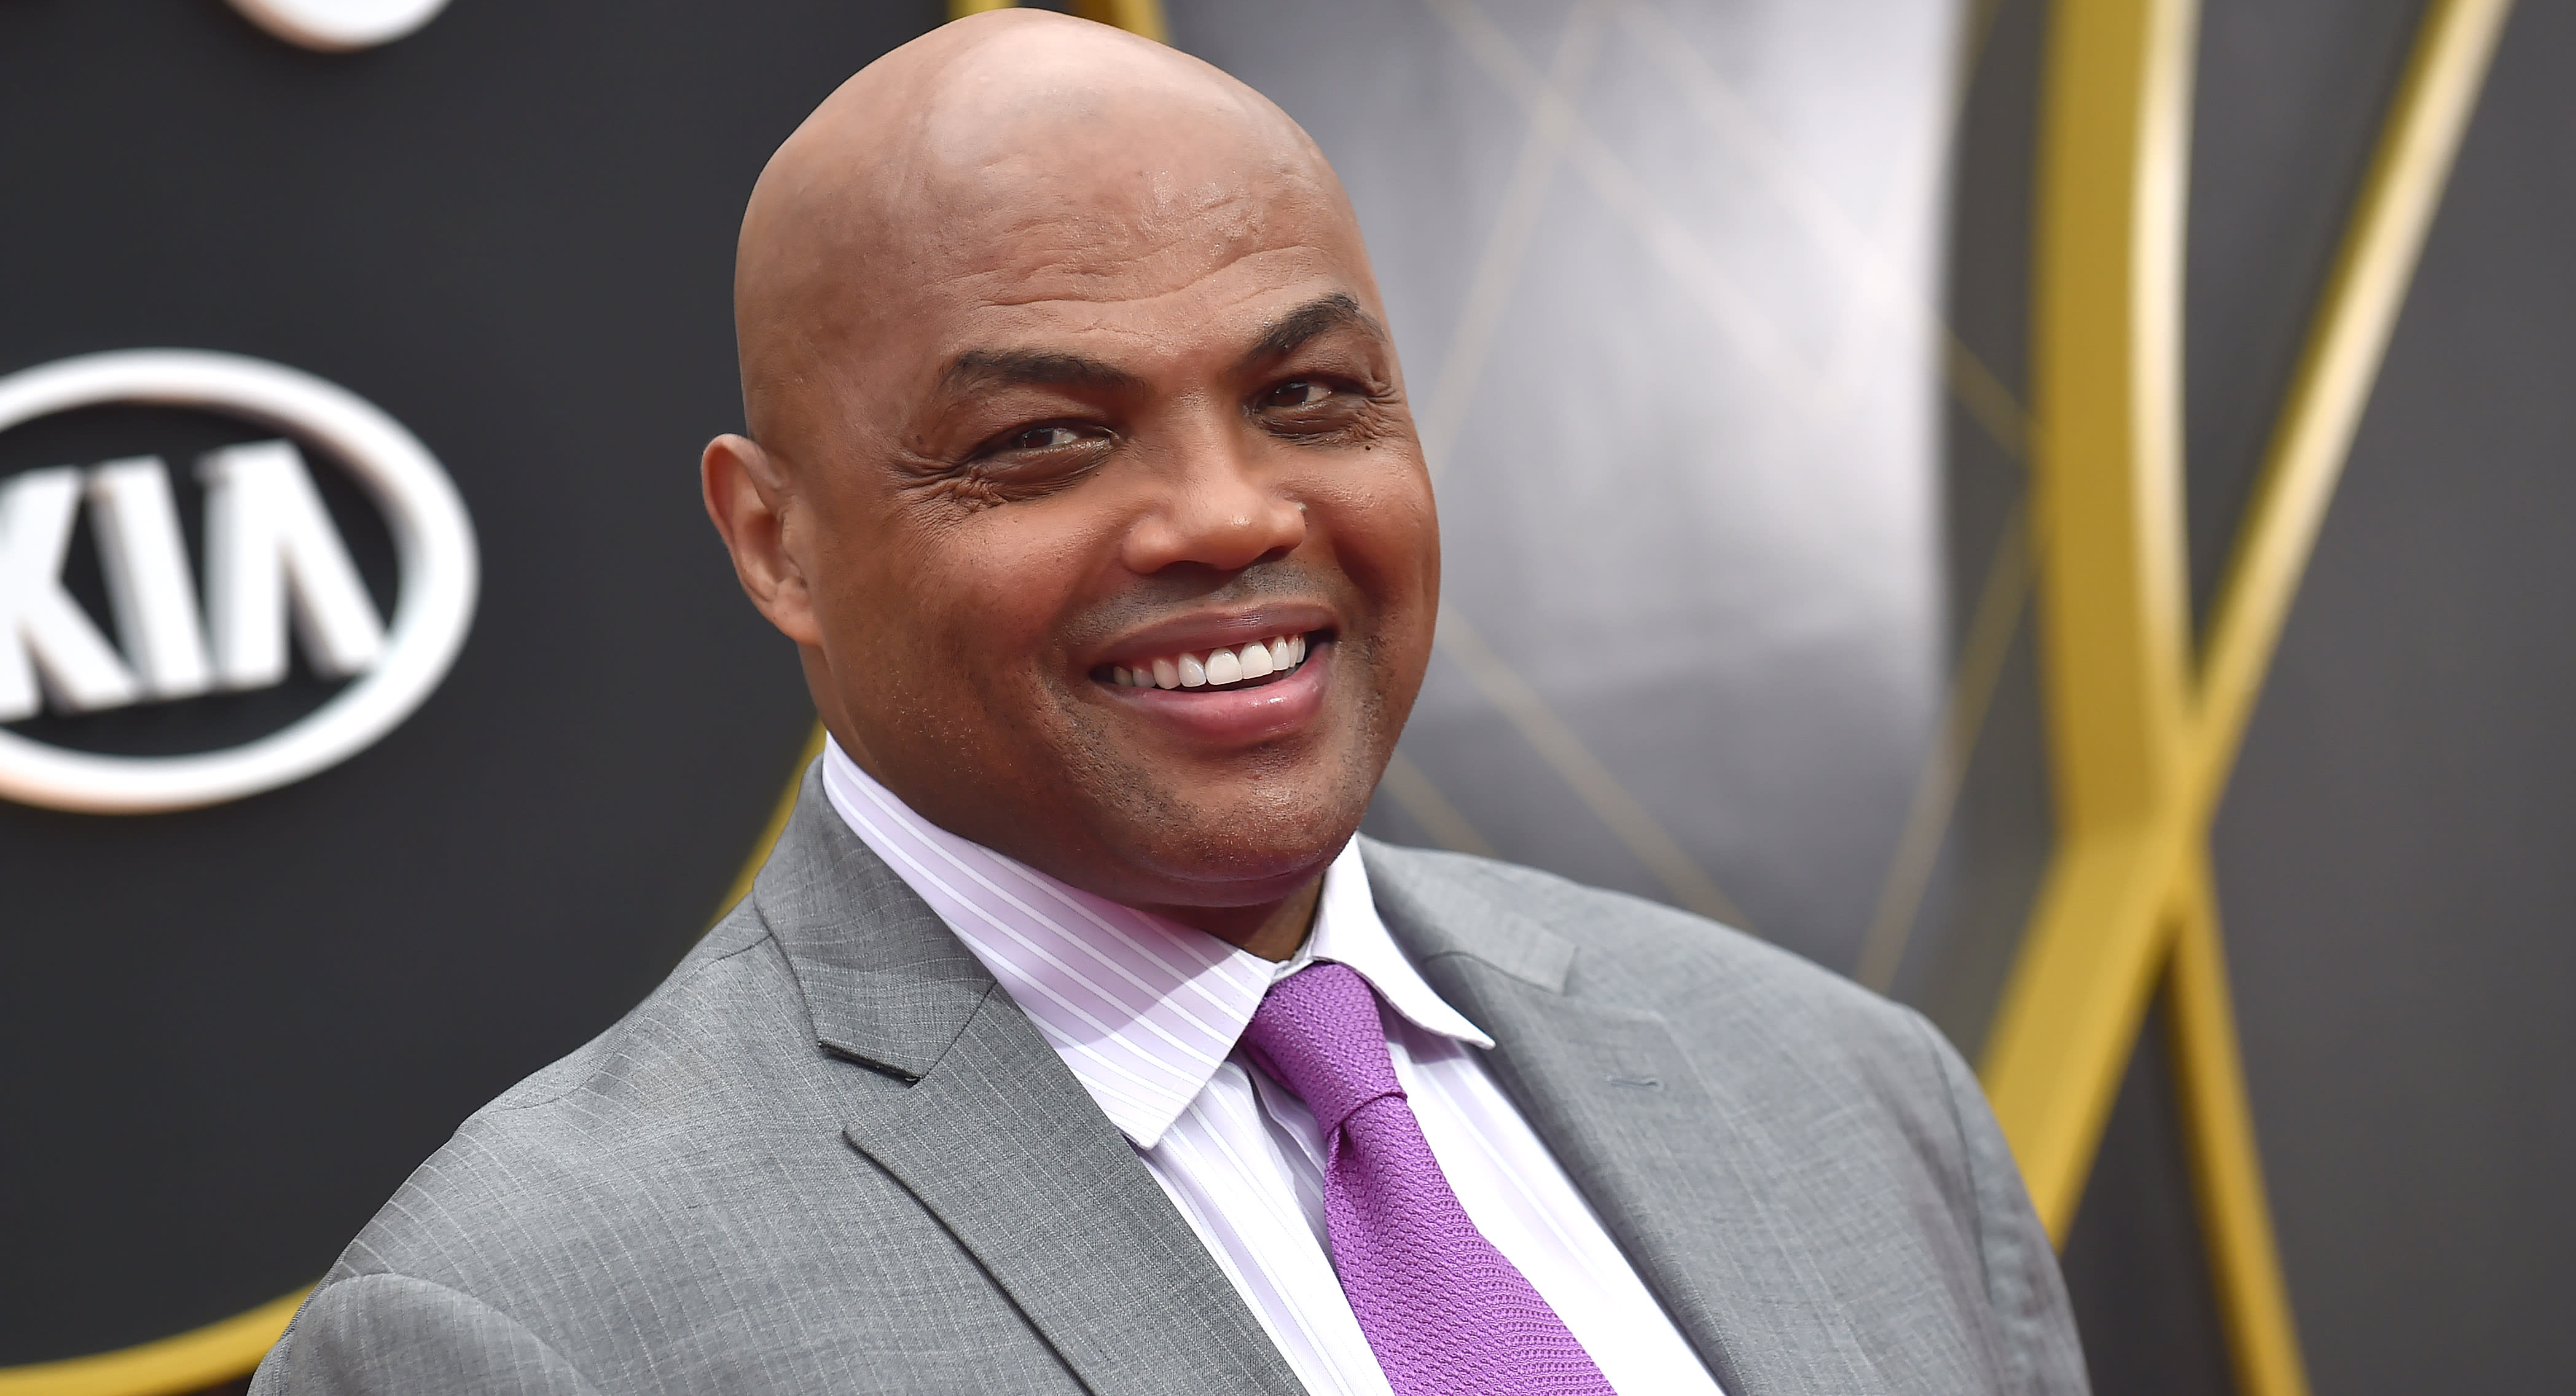 Charles Barkley to sell memorabilia to build affordable housing